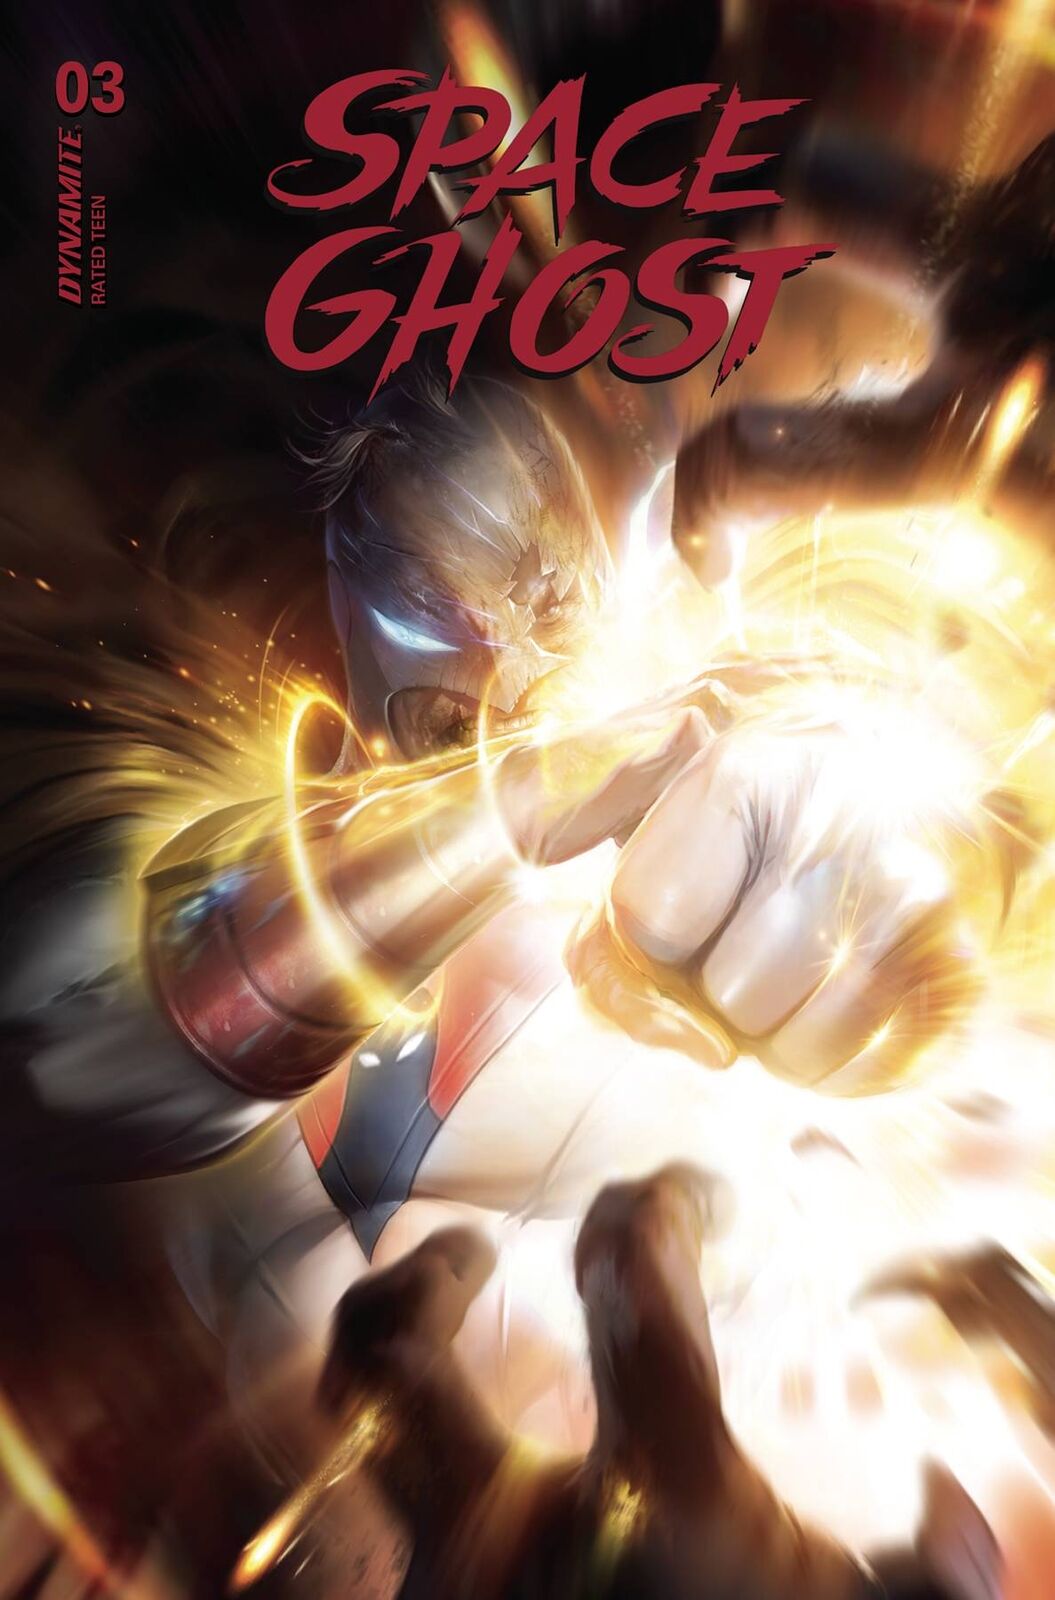 SPACE GHOST #3 - PICK YOUR COVERS - (PRESALE 7/3/24)